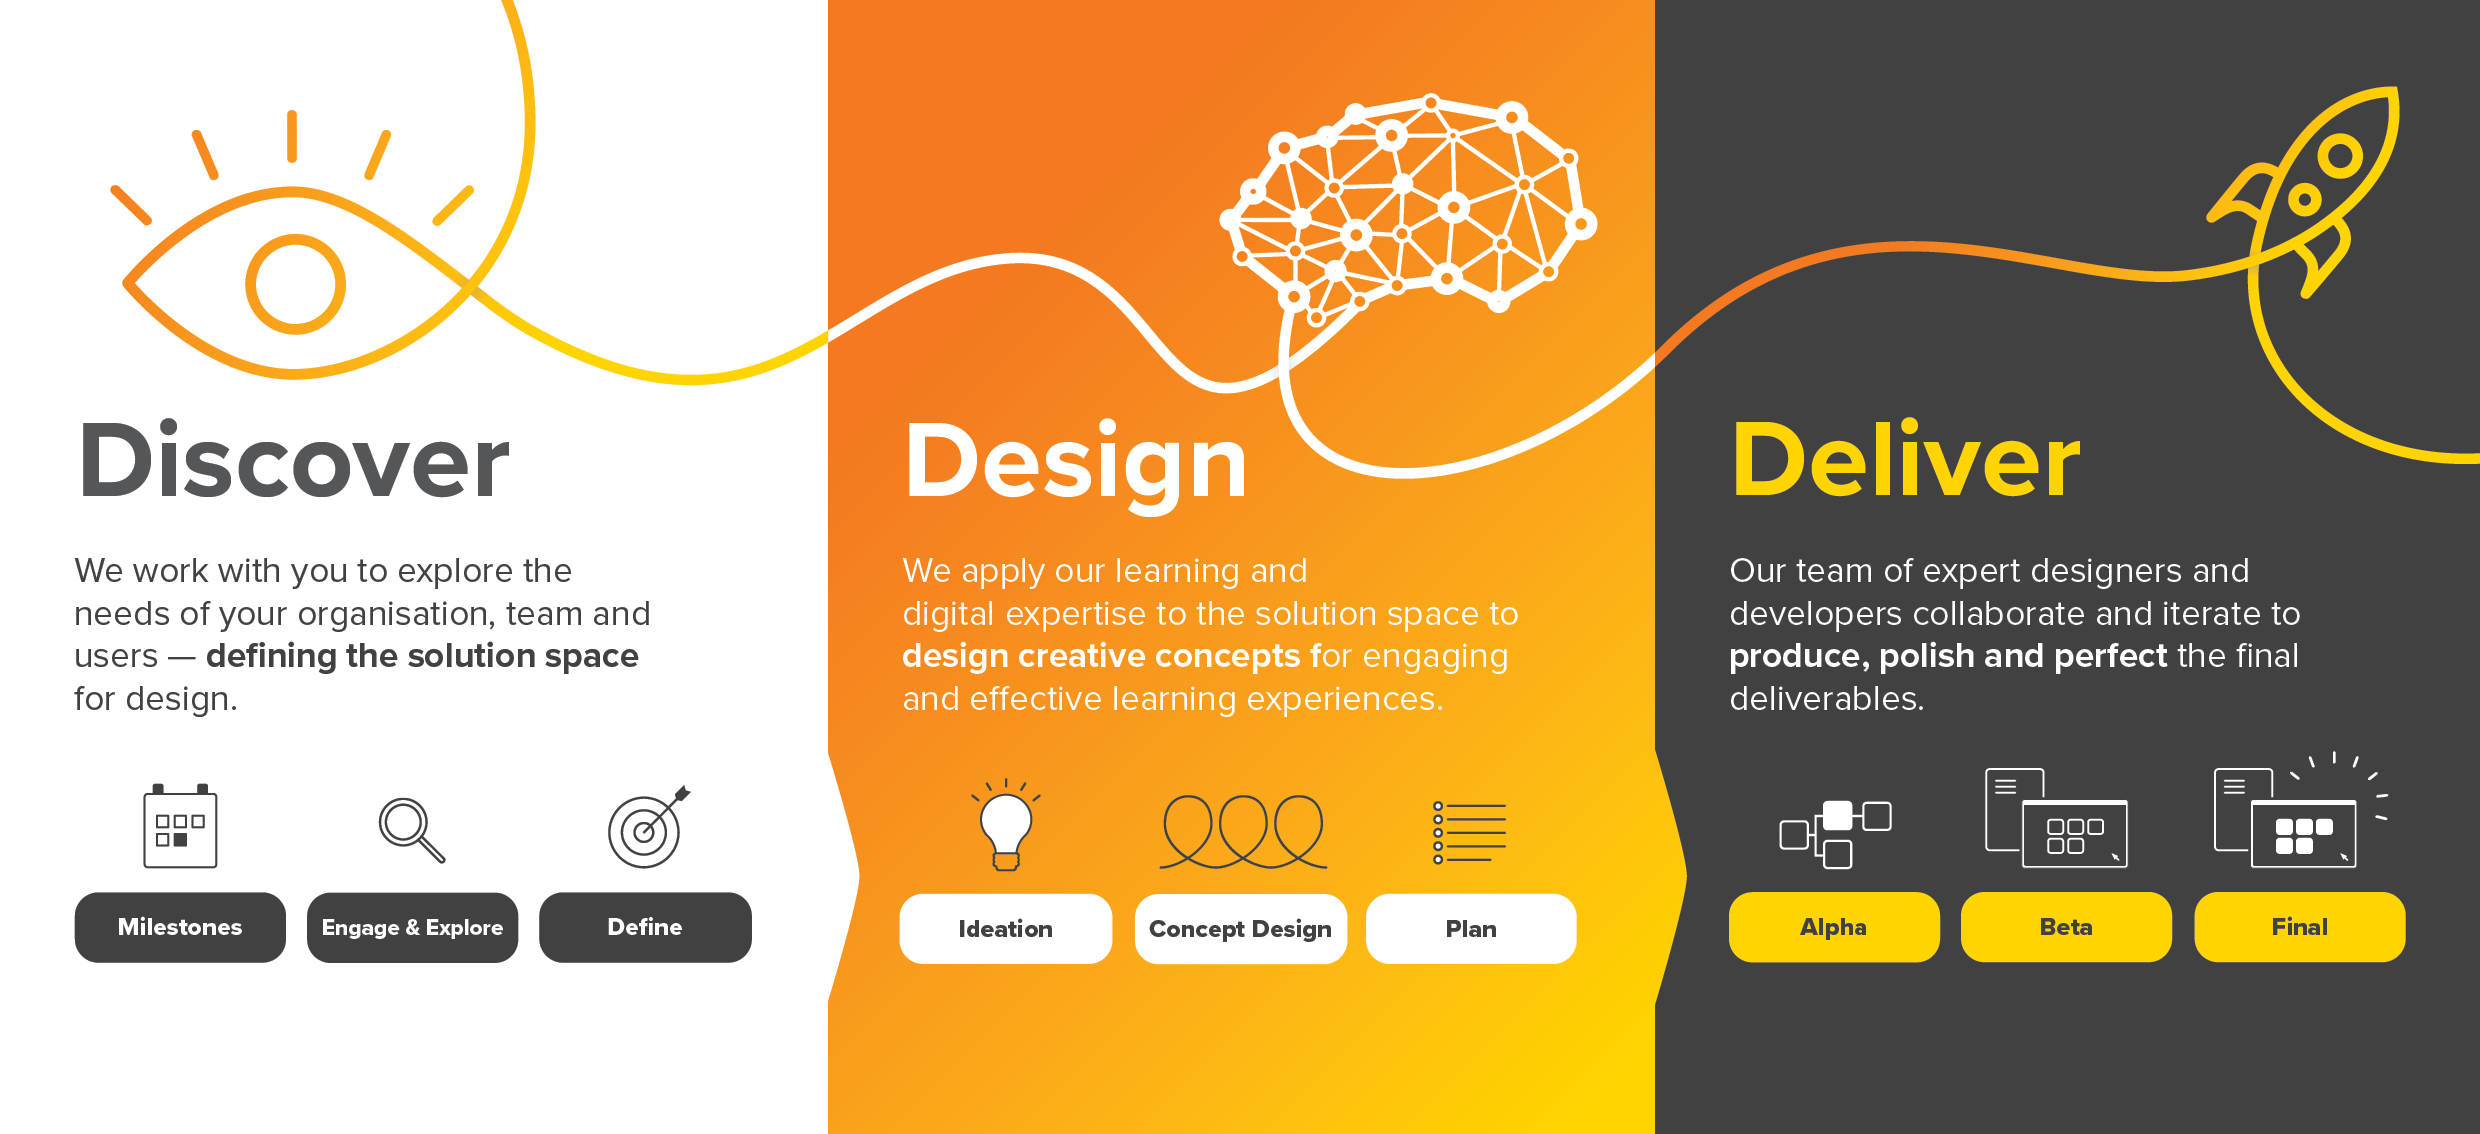 Discover, design and deliver processes with eye, brain, and rocket icons.